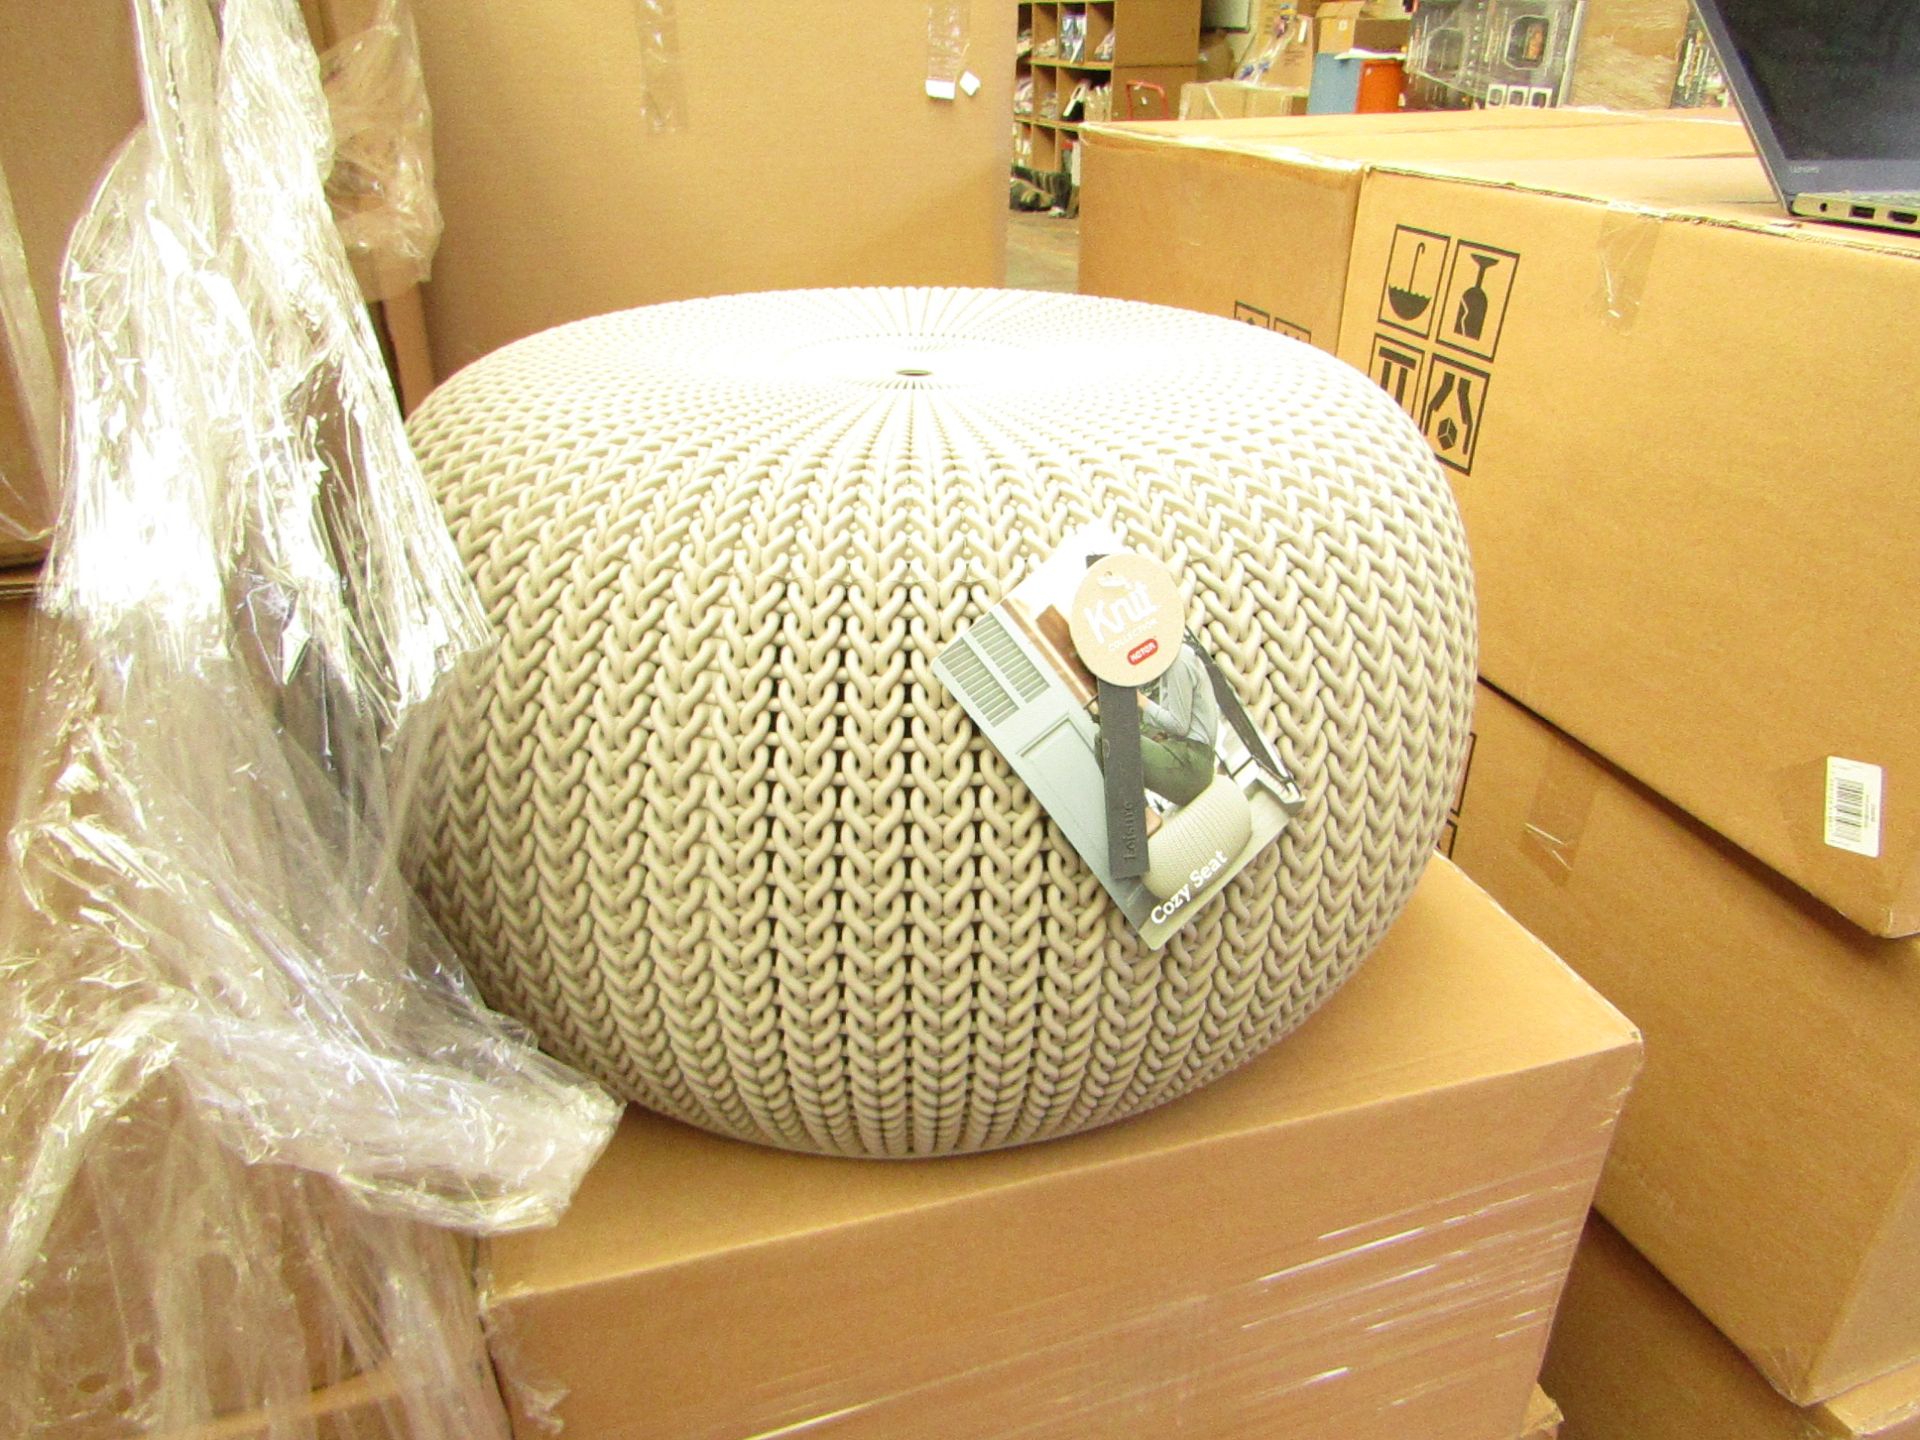 Keter Knit Collection cozy seat, new and boxed.